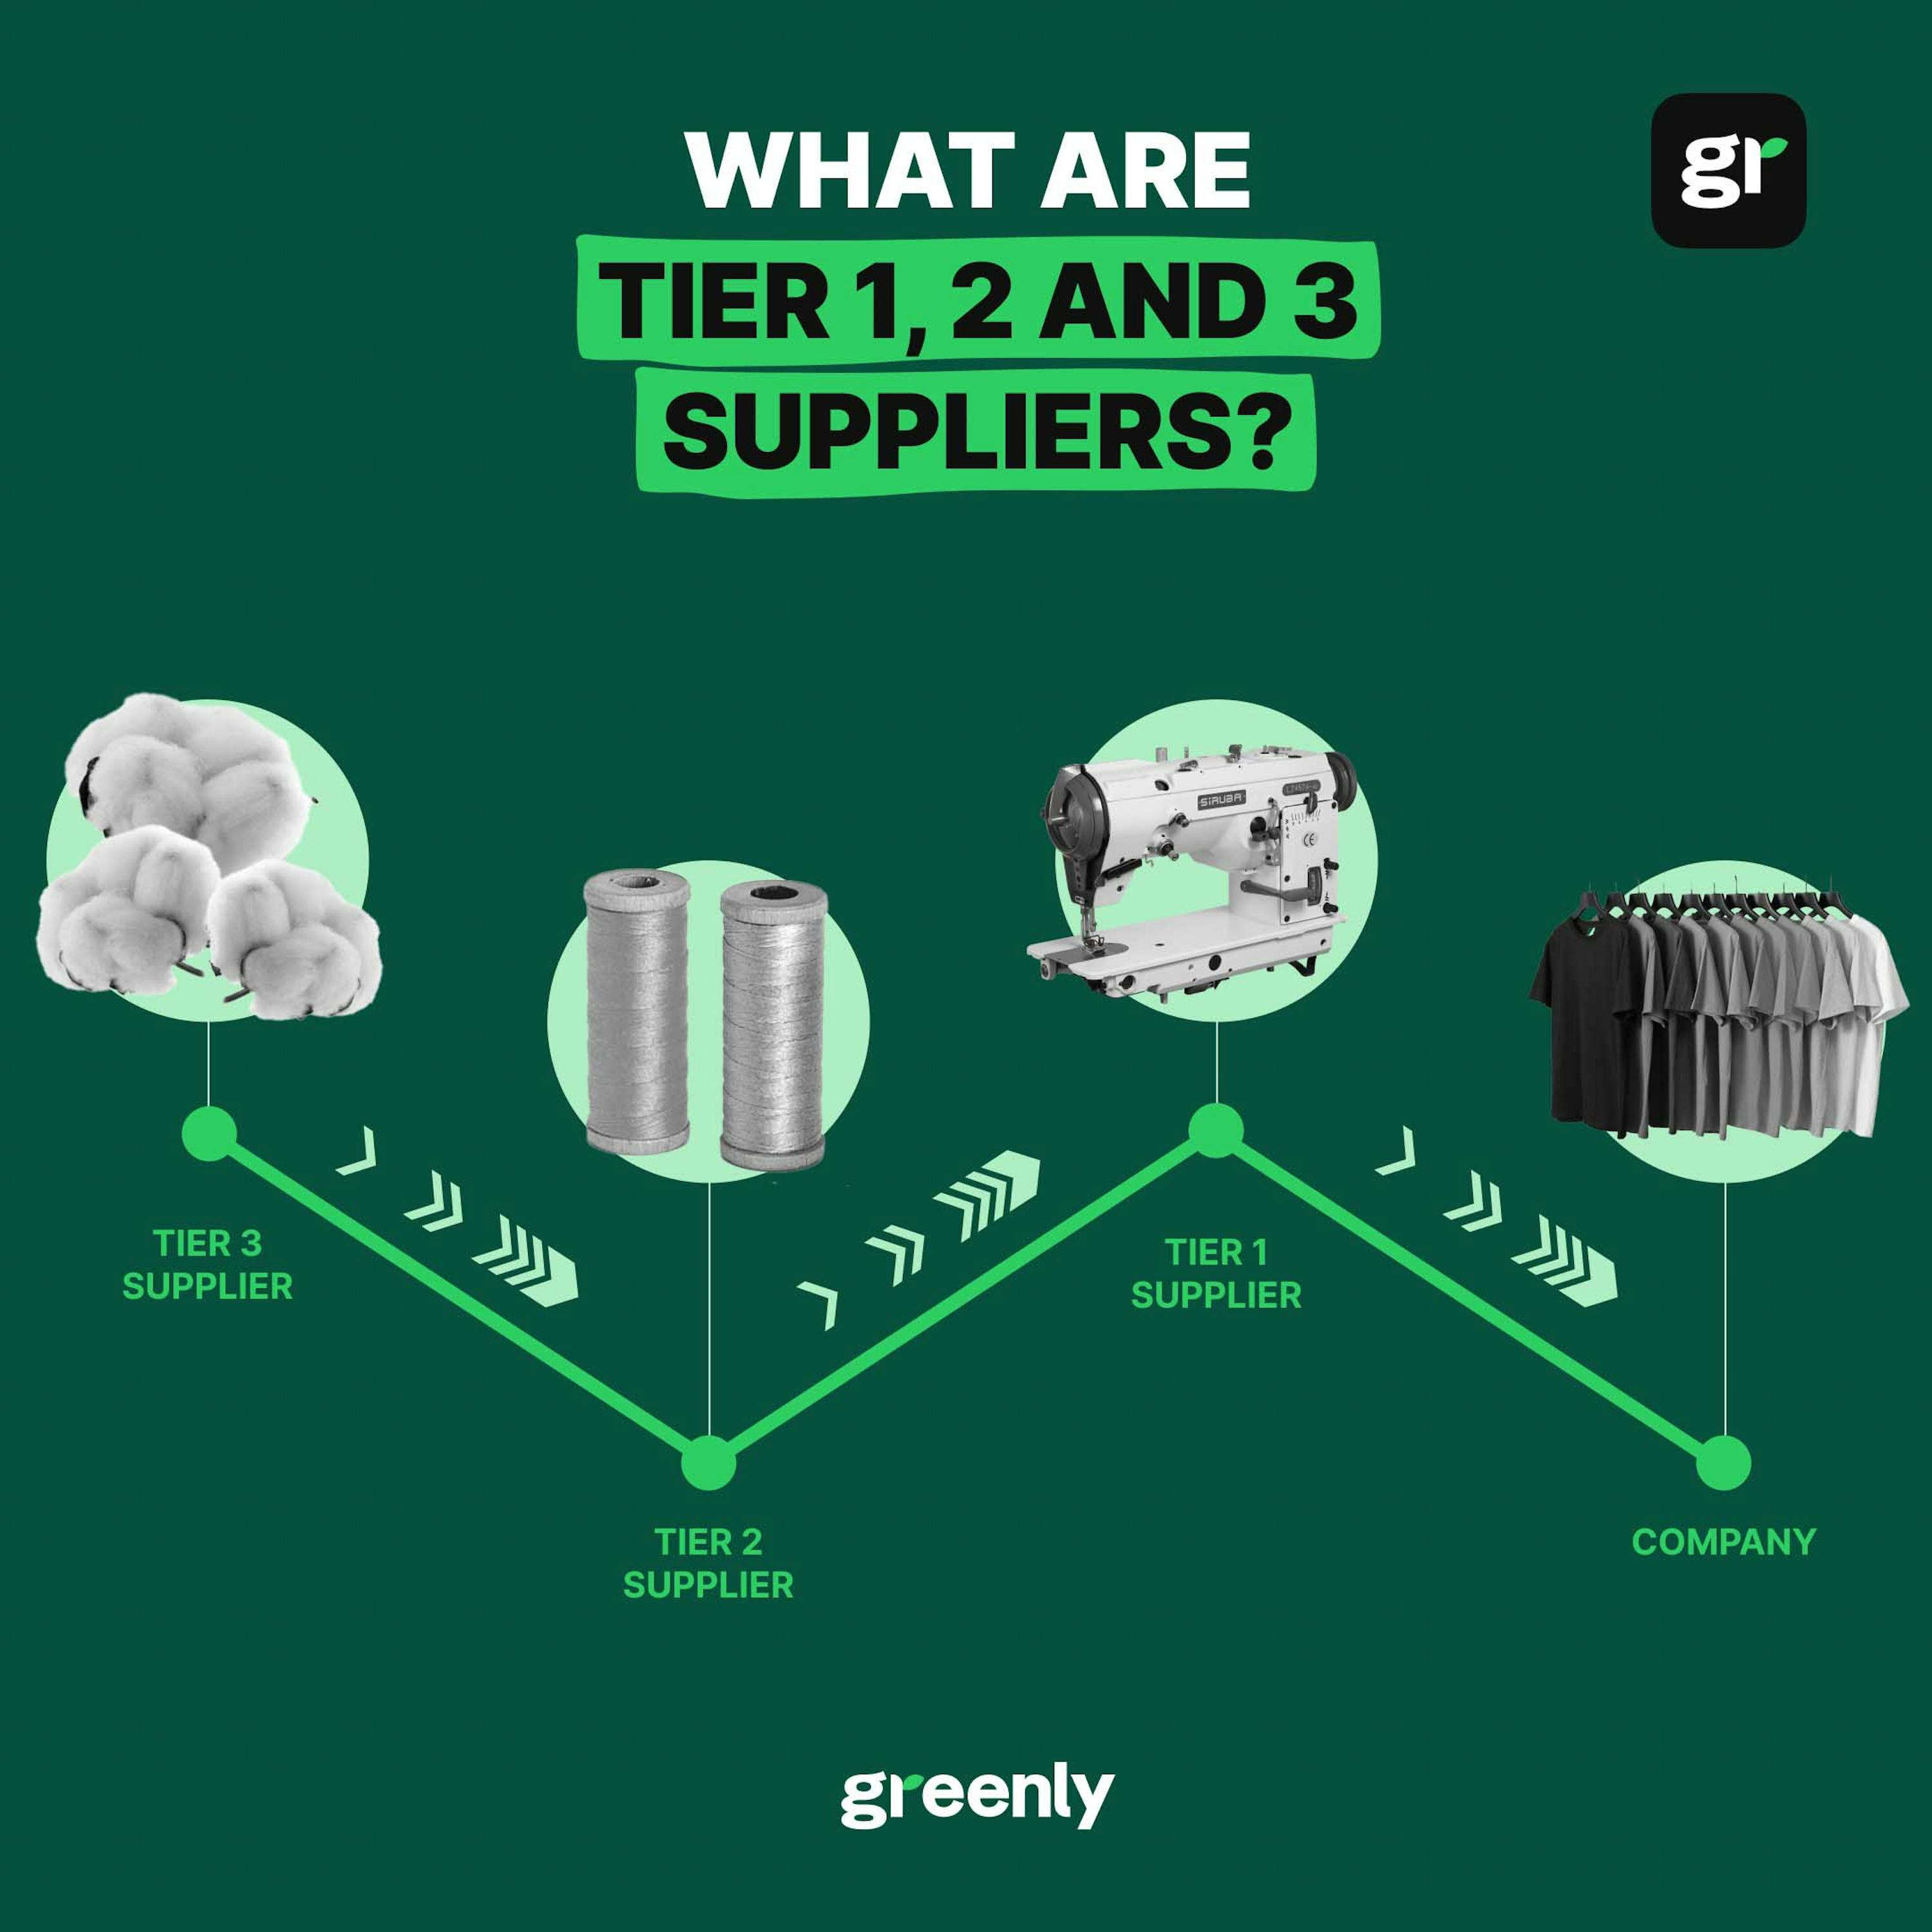 Tier 1, 2 and 3 Suppliers infographic